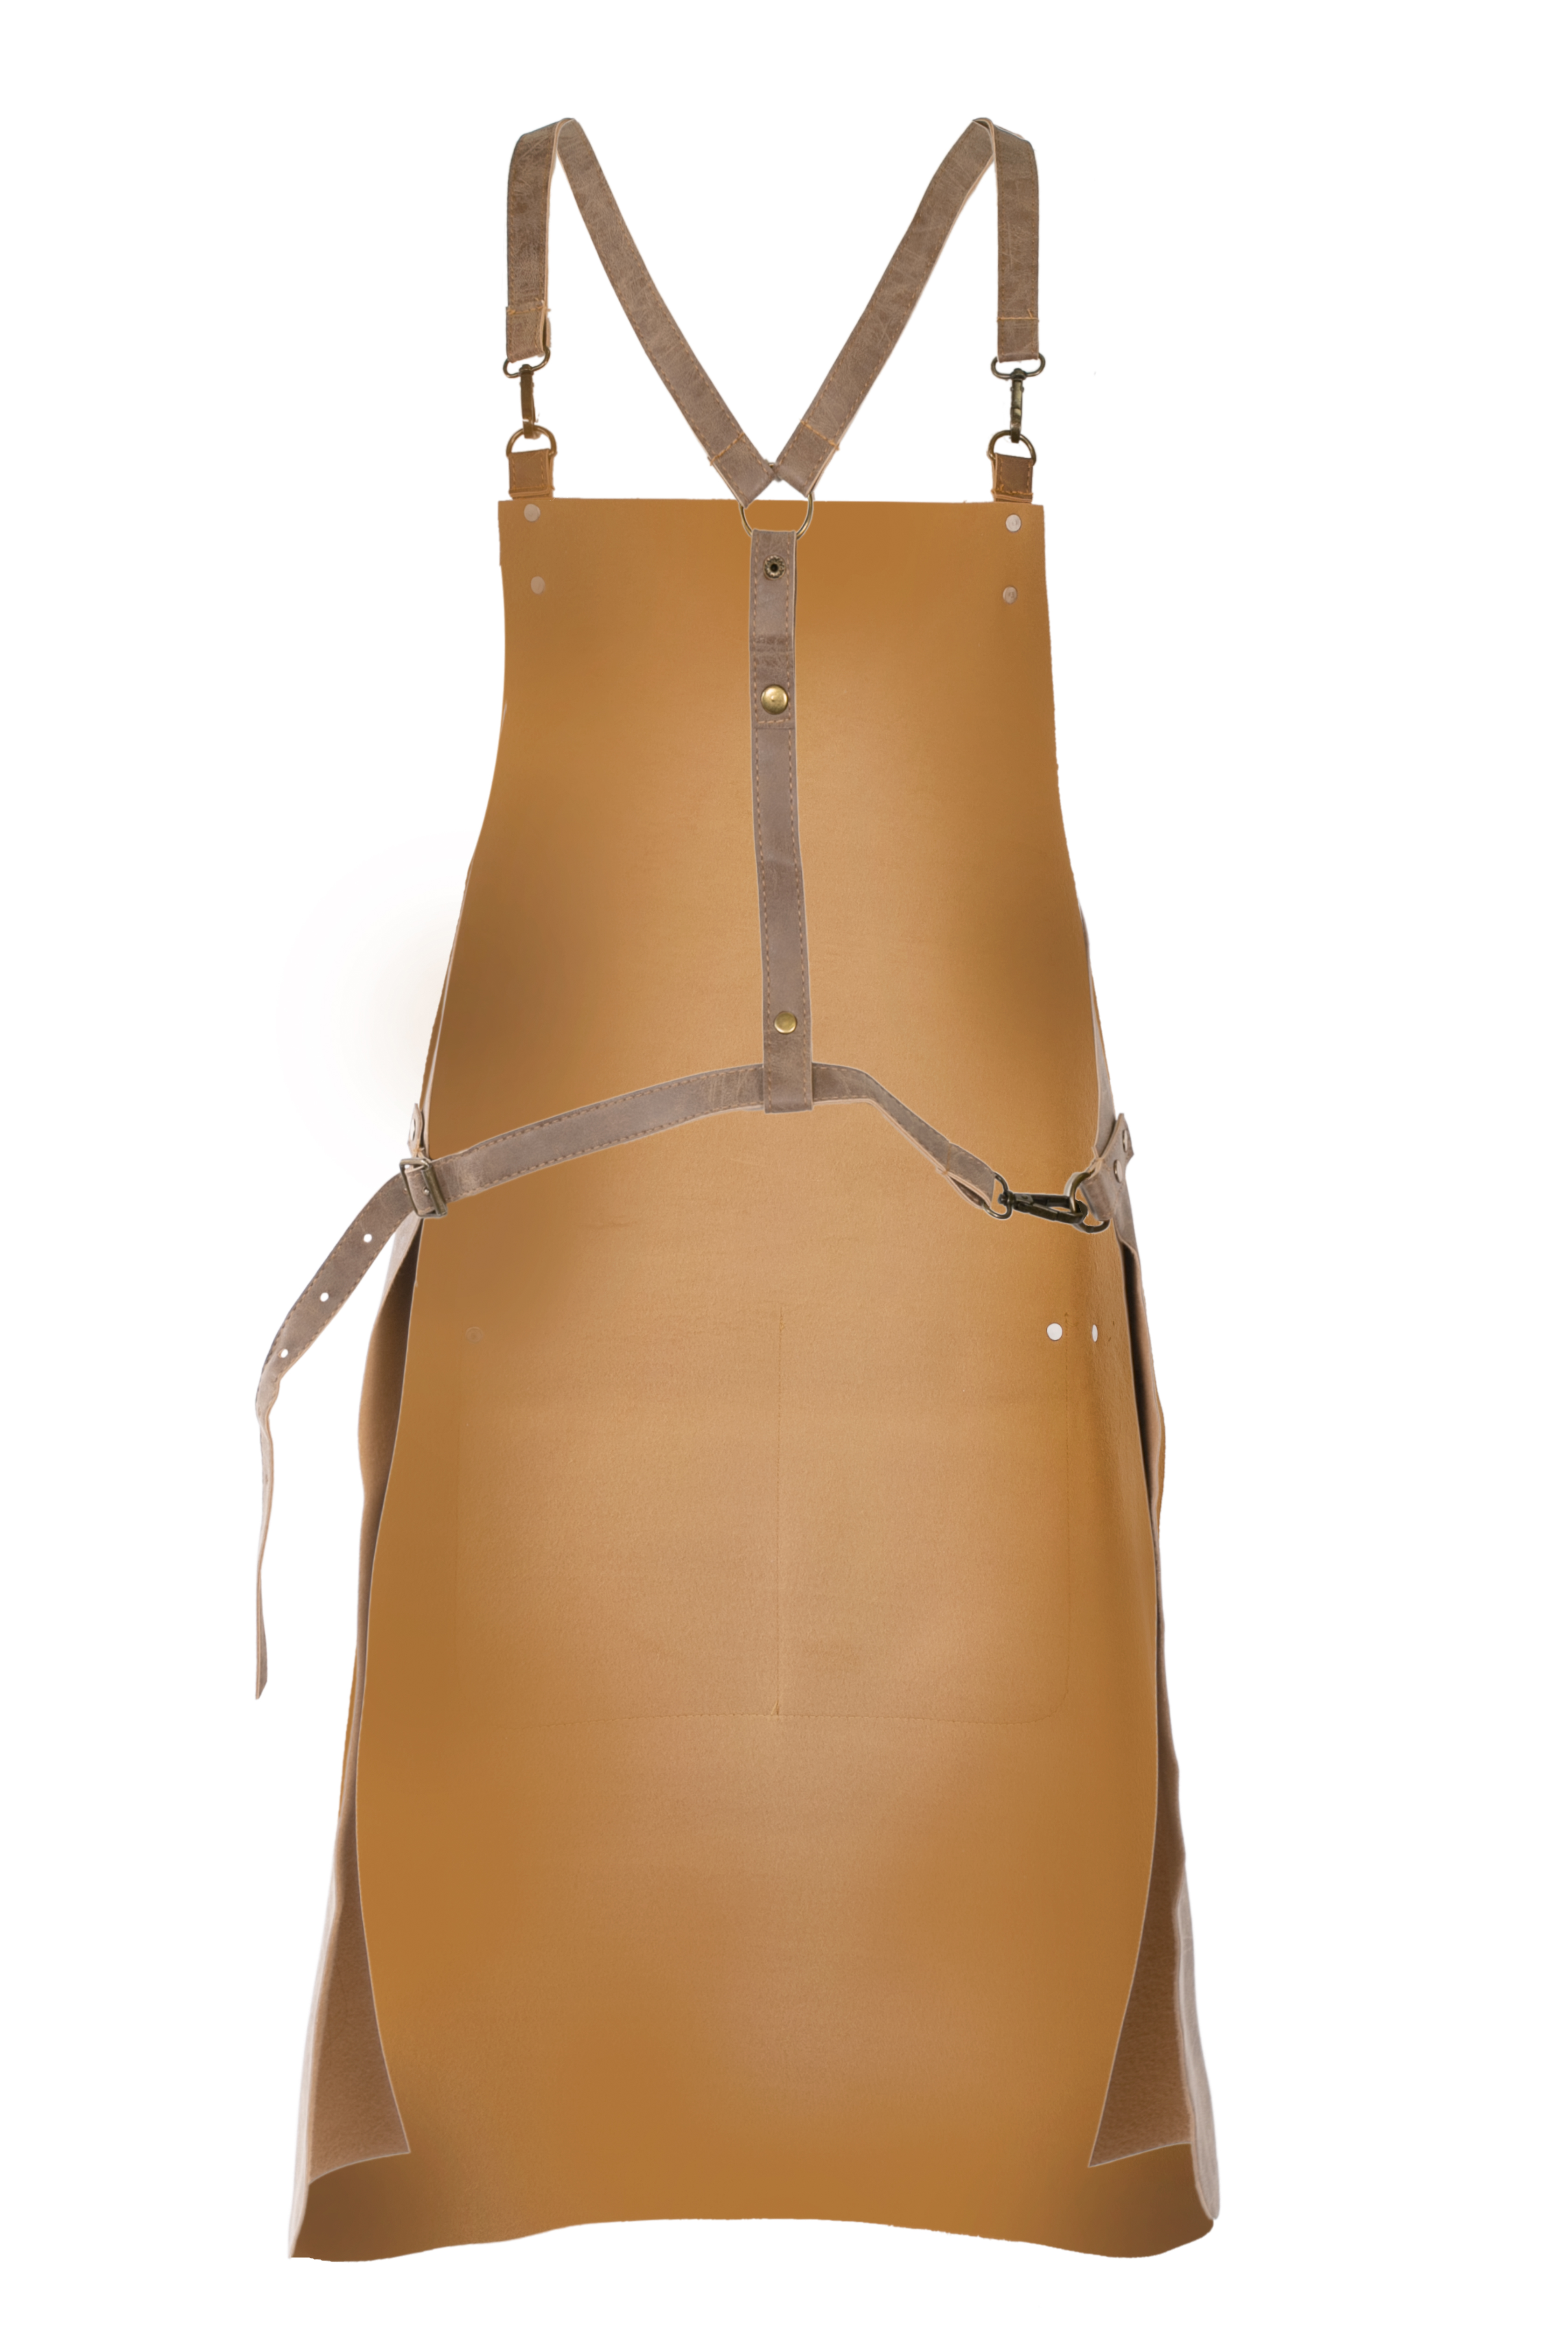 Apron TRUMAN (Sling Back Barber Style), 64x85 cm, taupe